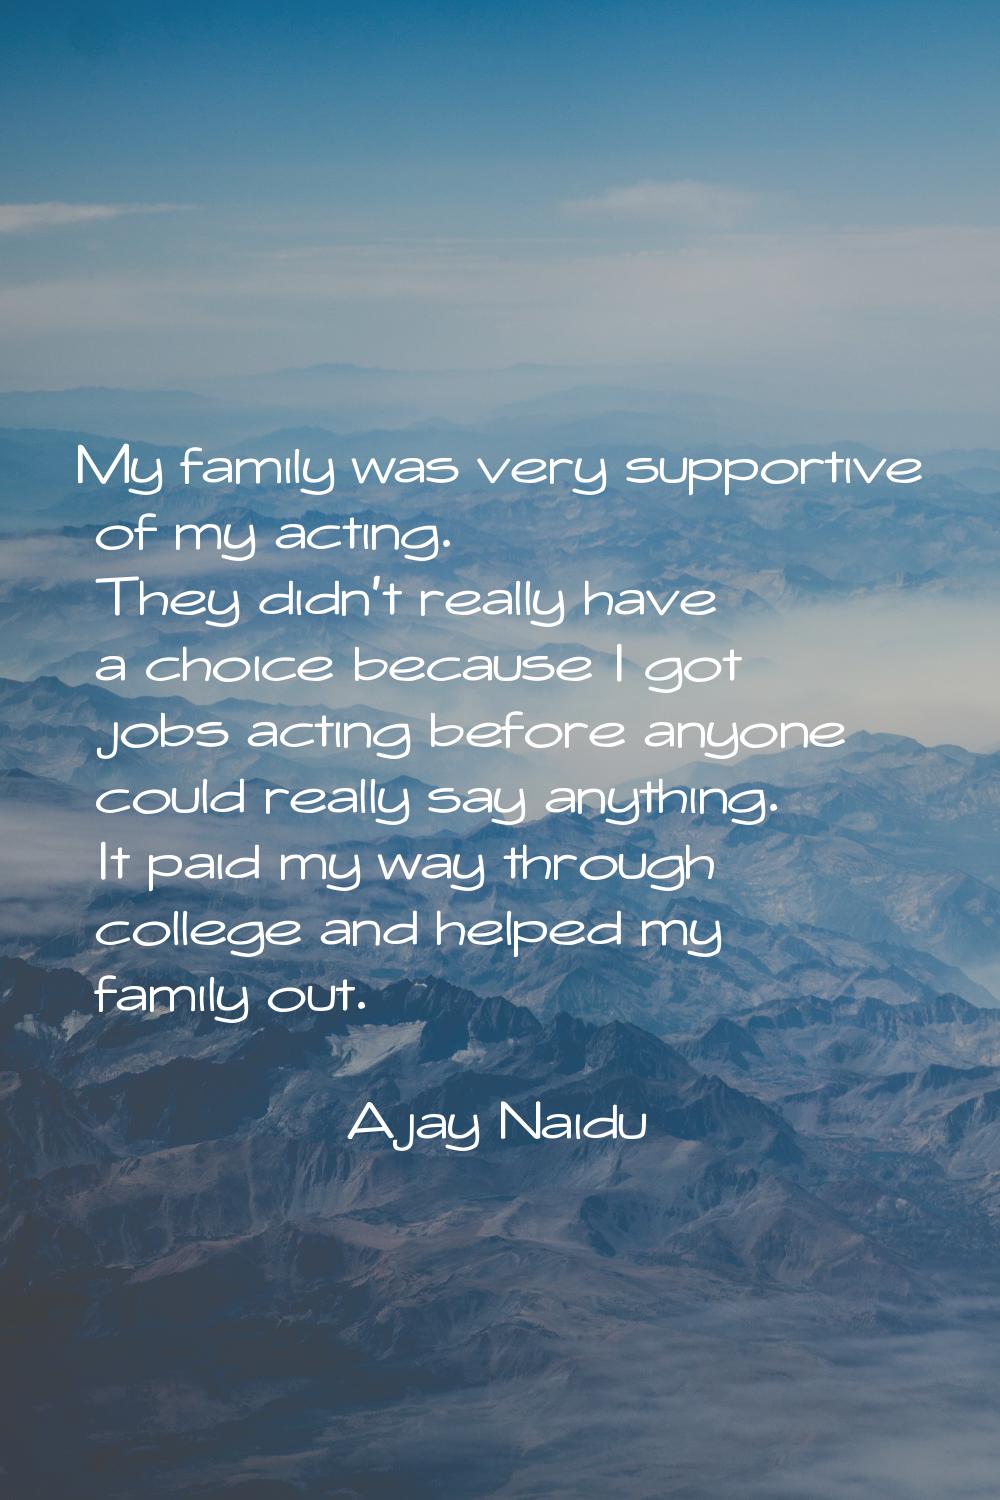 My family was very supportive of my acting. They didn't really have a choice because I got jobs act